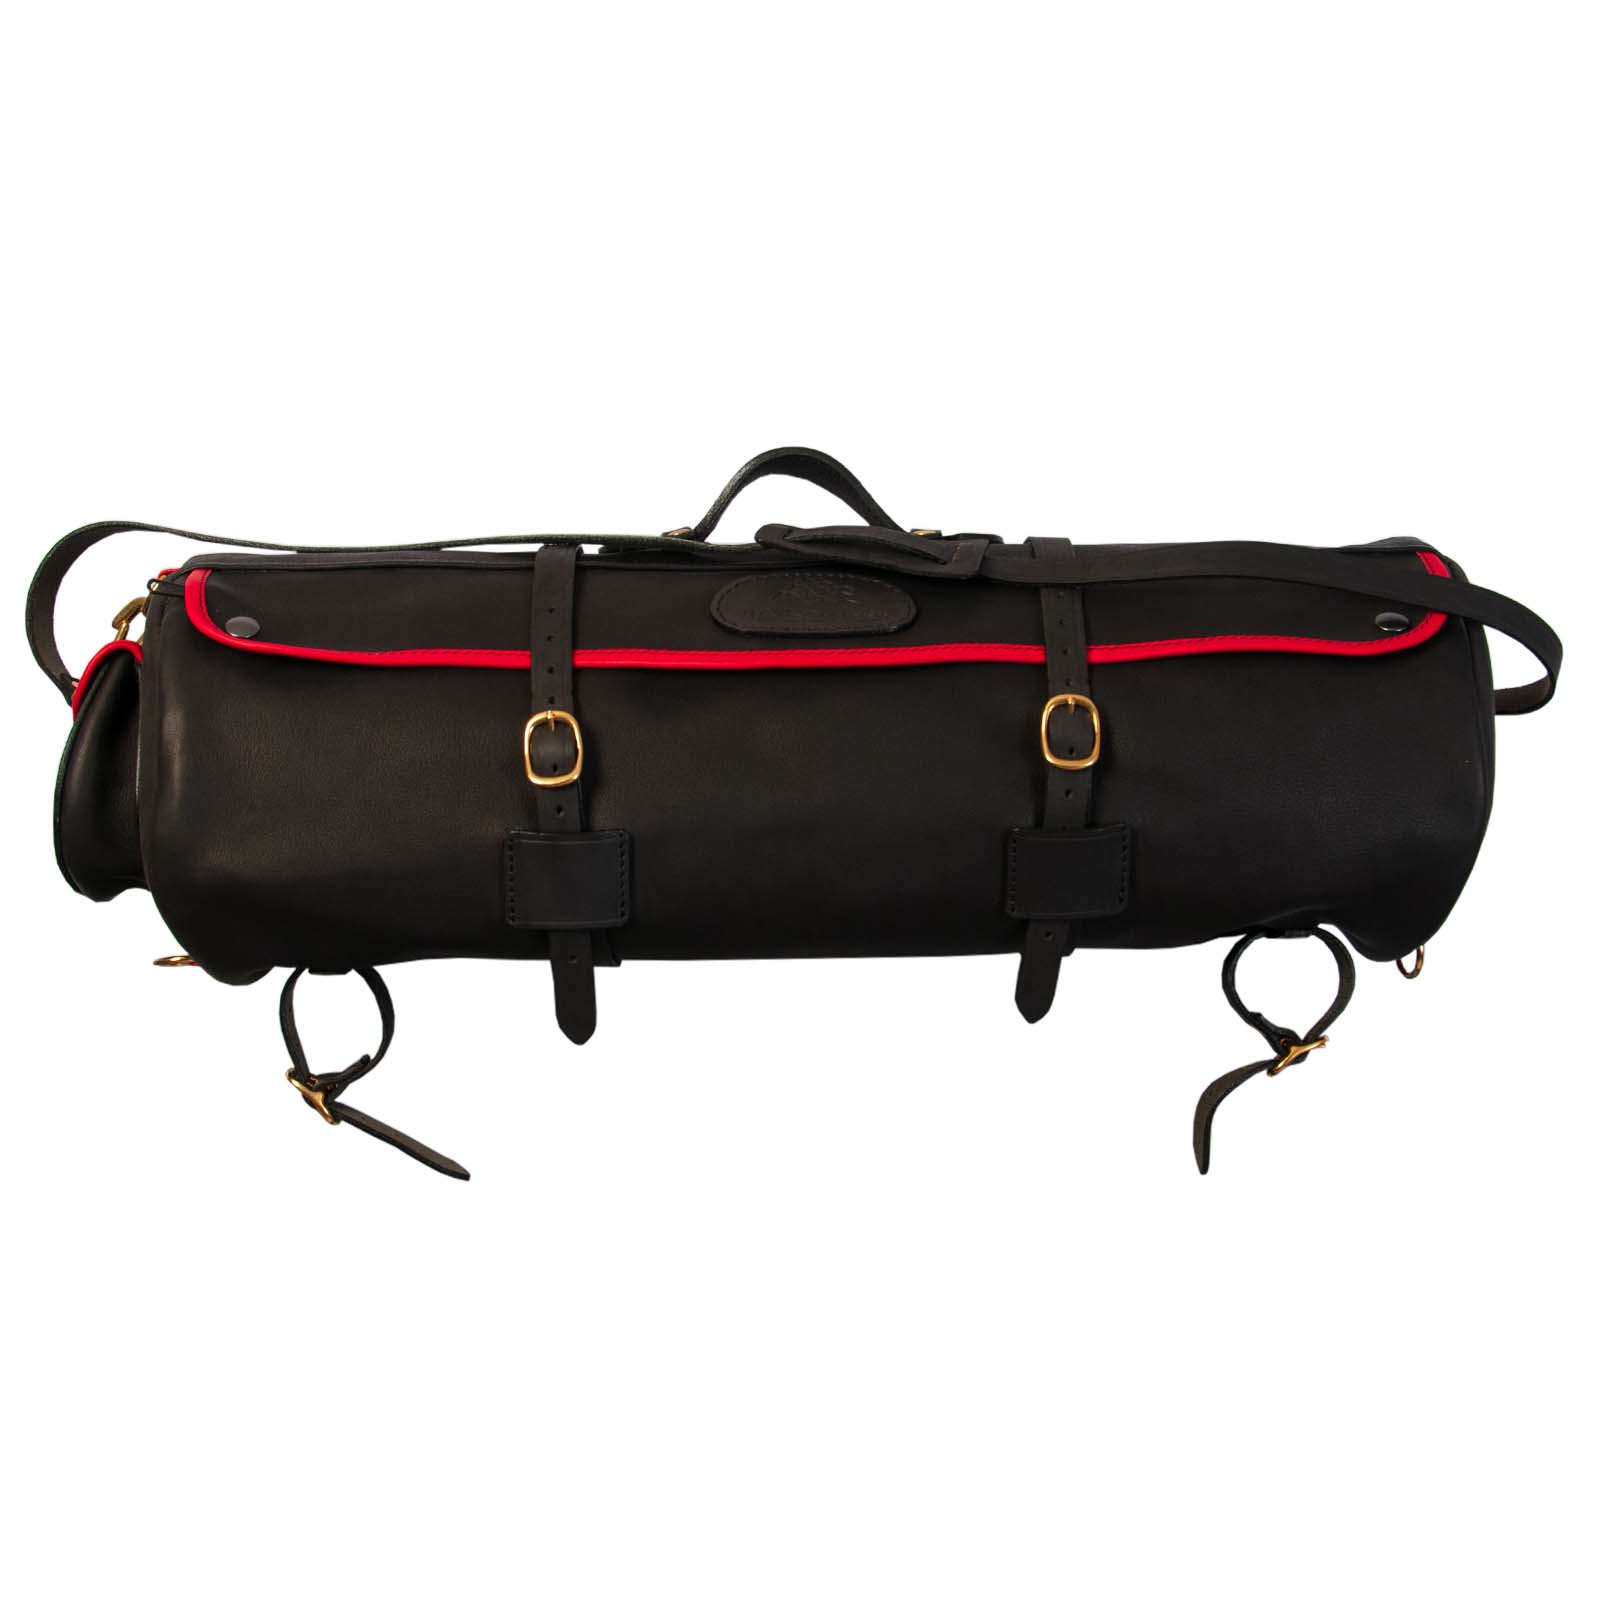 Cantle bag Chic 15 liters